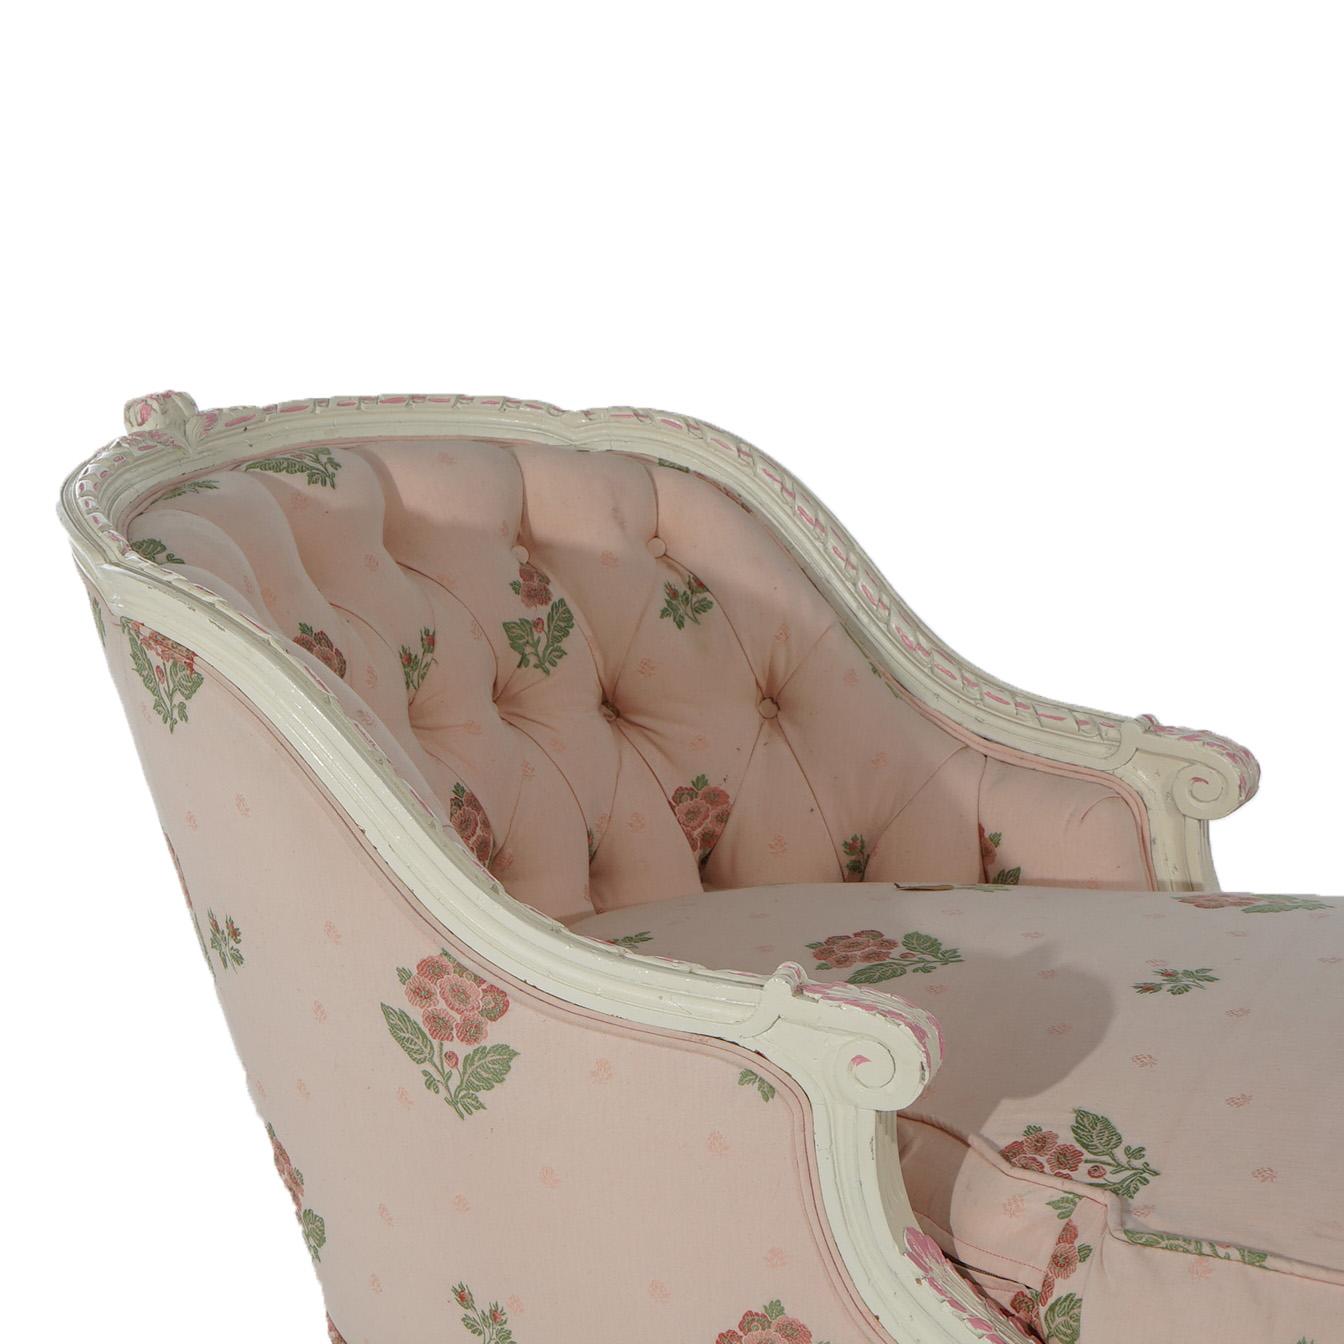 Upholstery Antique French Louis XVI Style Polychromed Recamier Chaise Lounge C1930